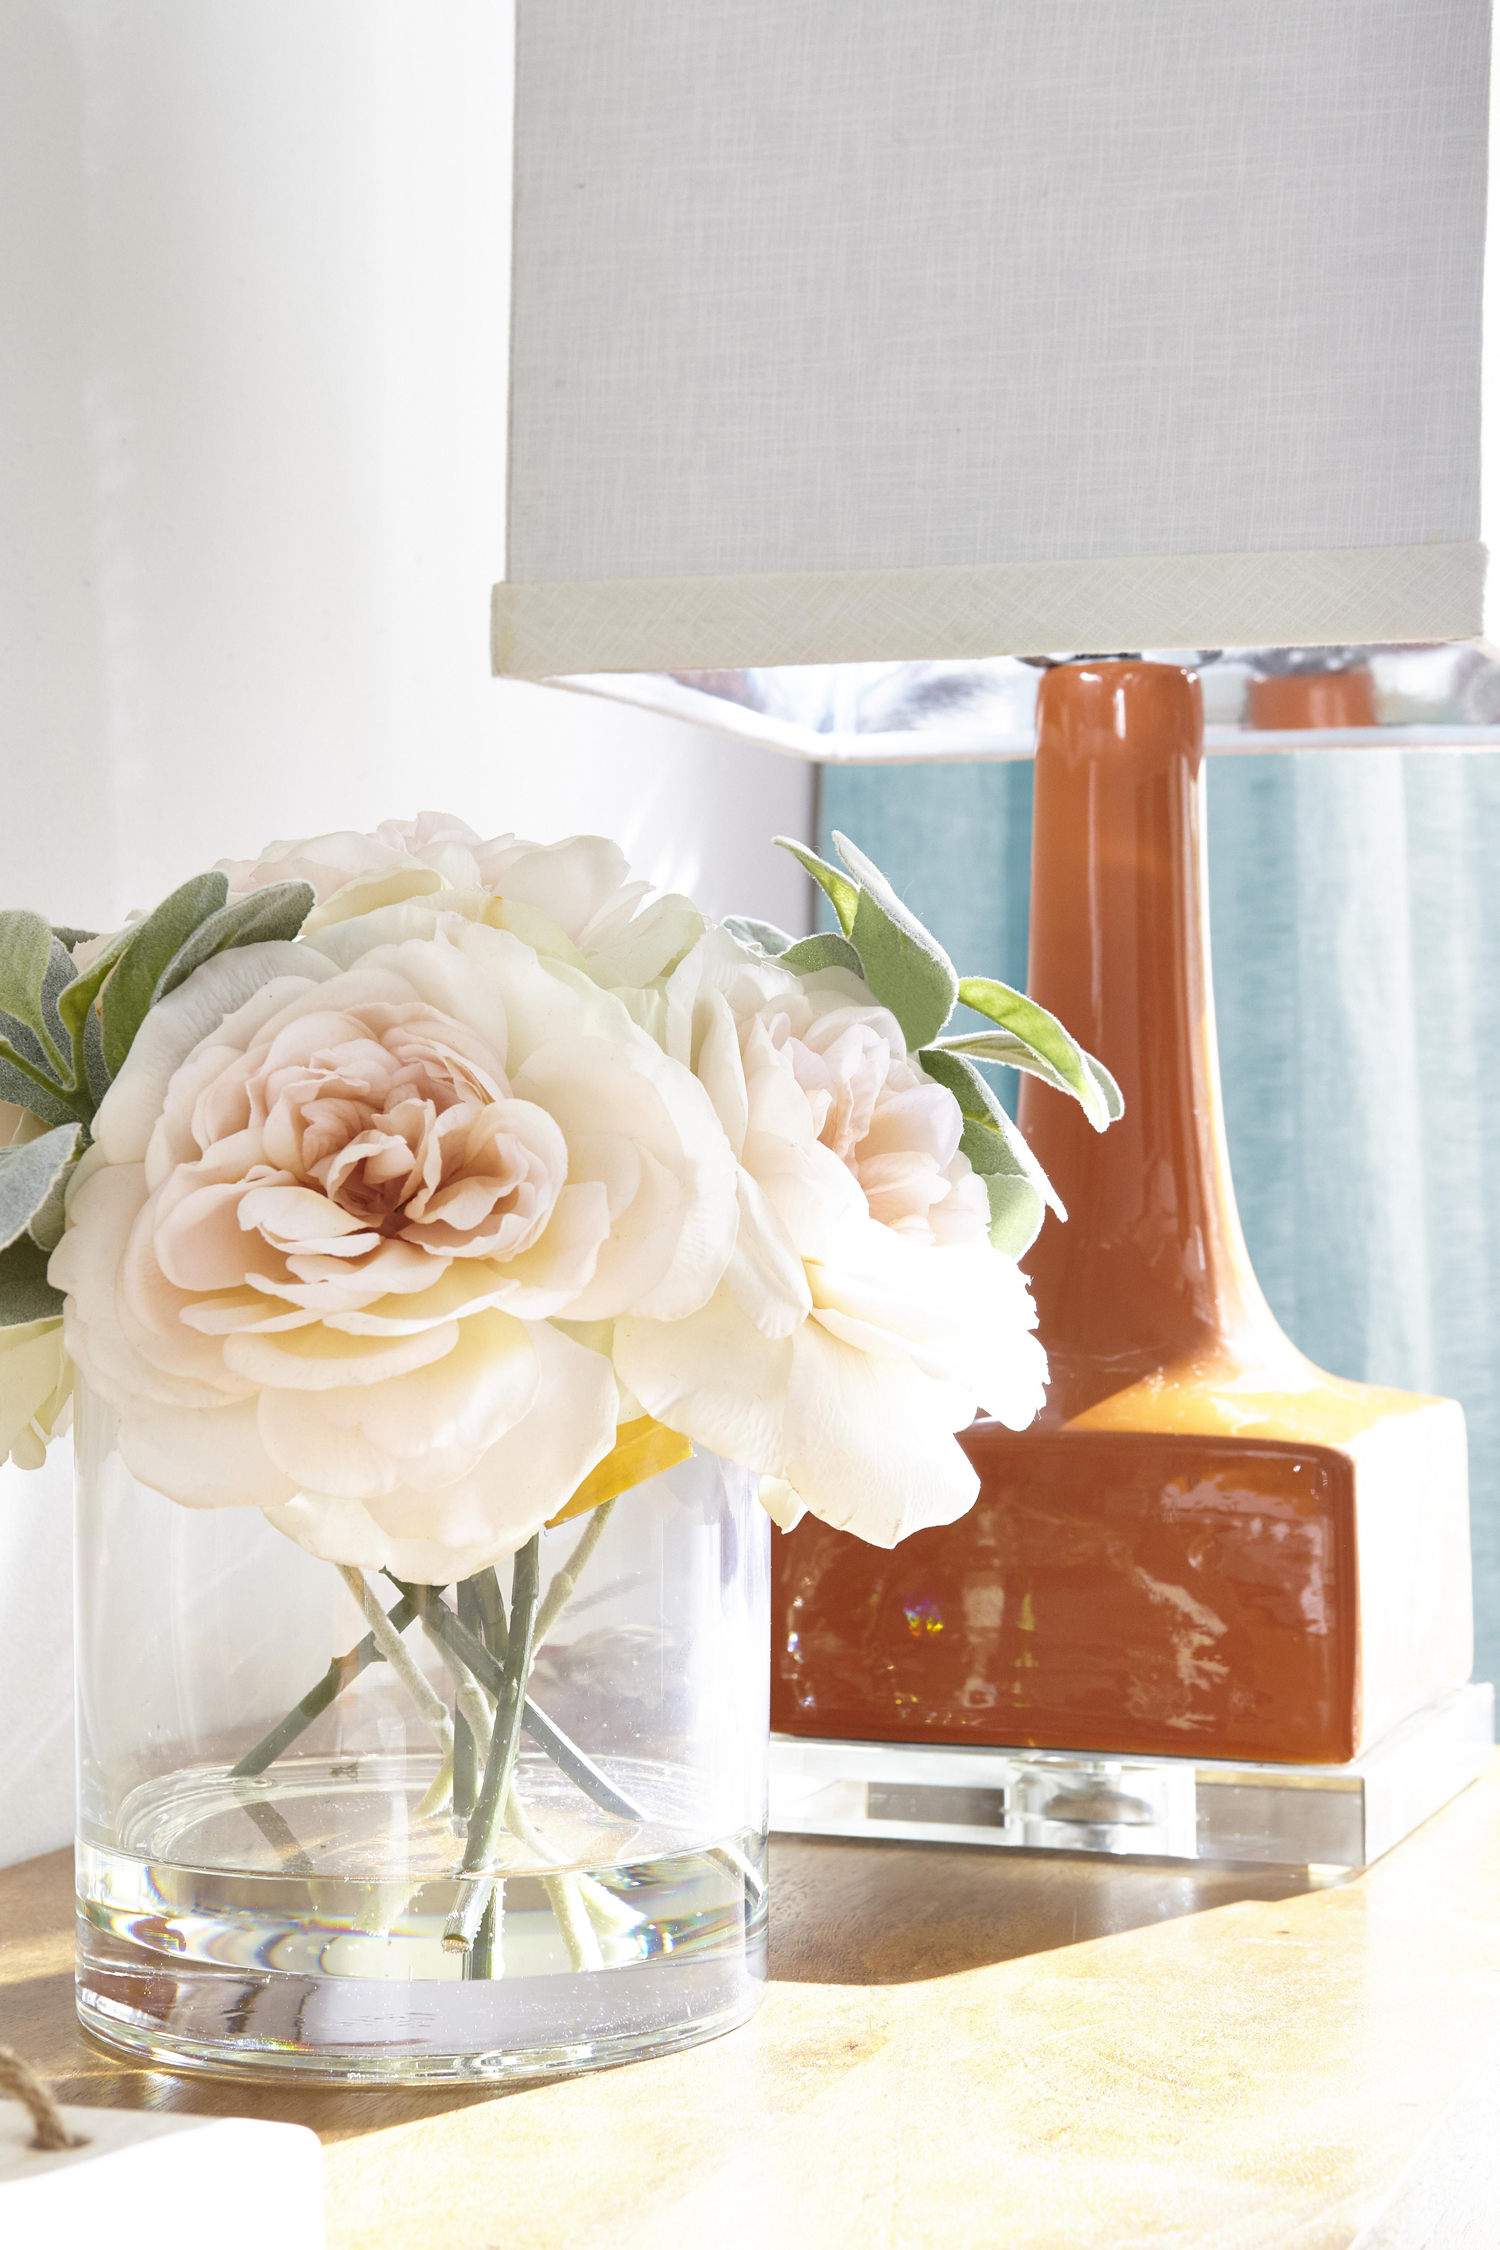 Flowers in vase on console table